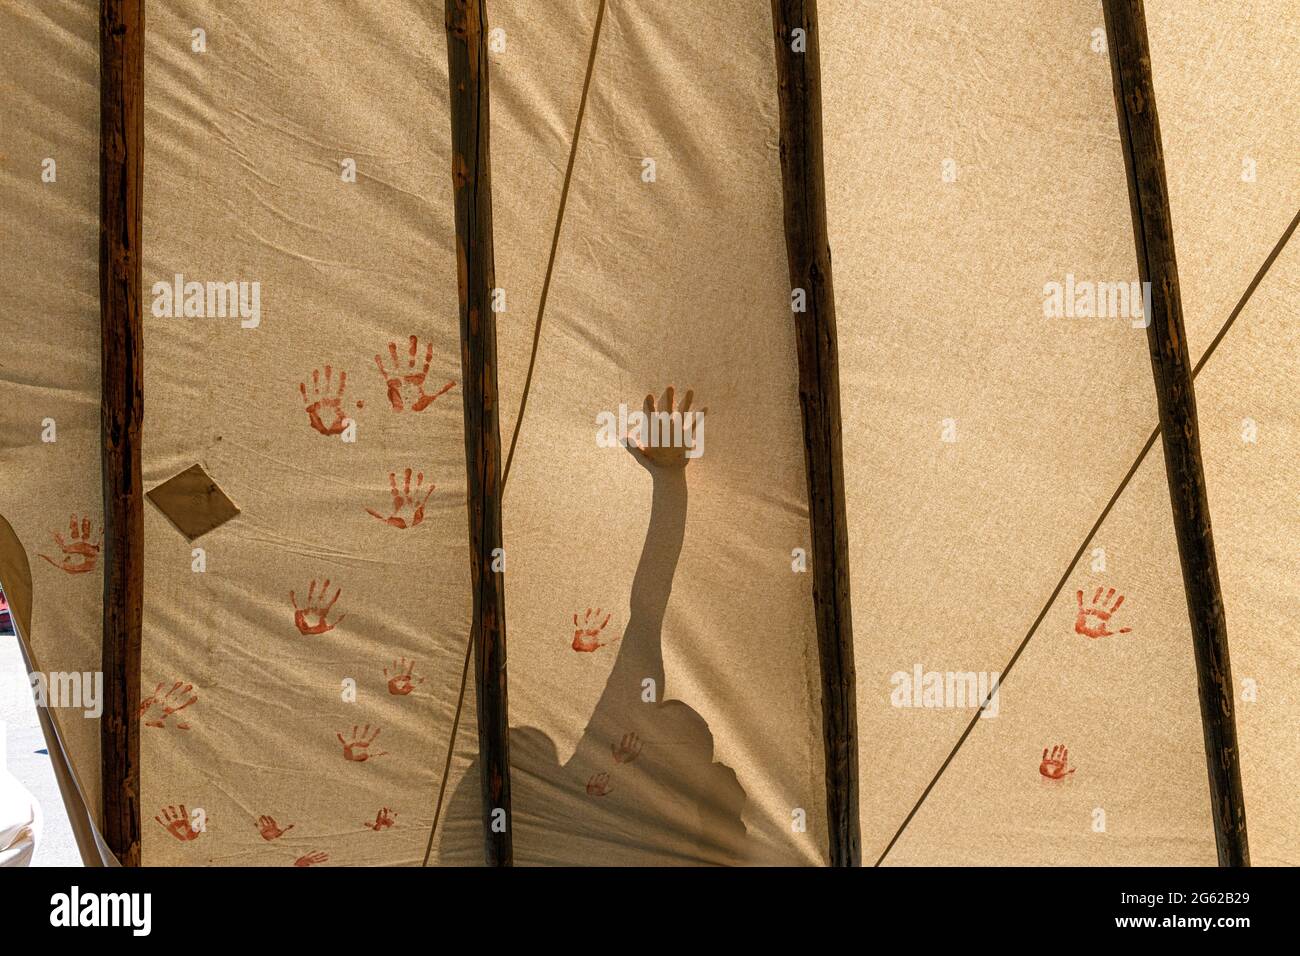 Indigenous  First Nations children placing painted hands on a teepee to commemorate  unmarked graves found on Canadian residential school property Stock Photo